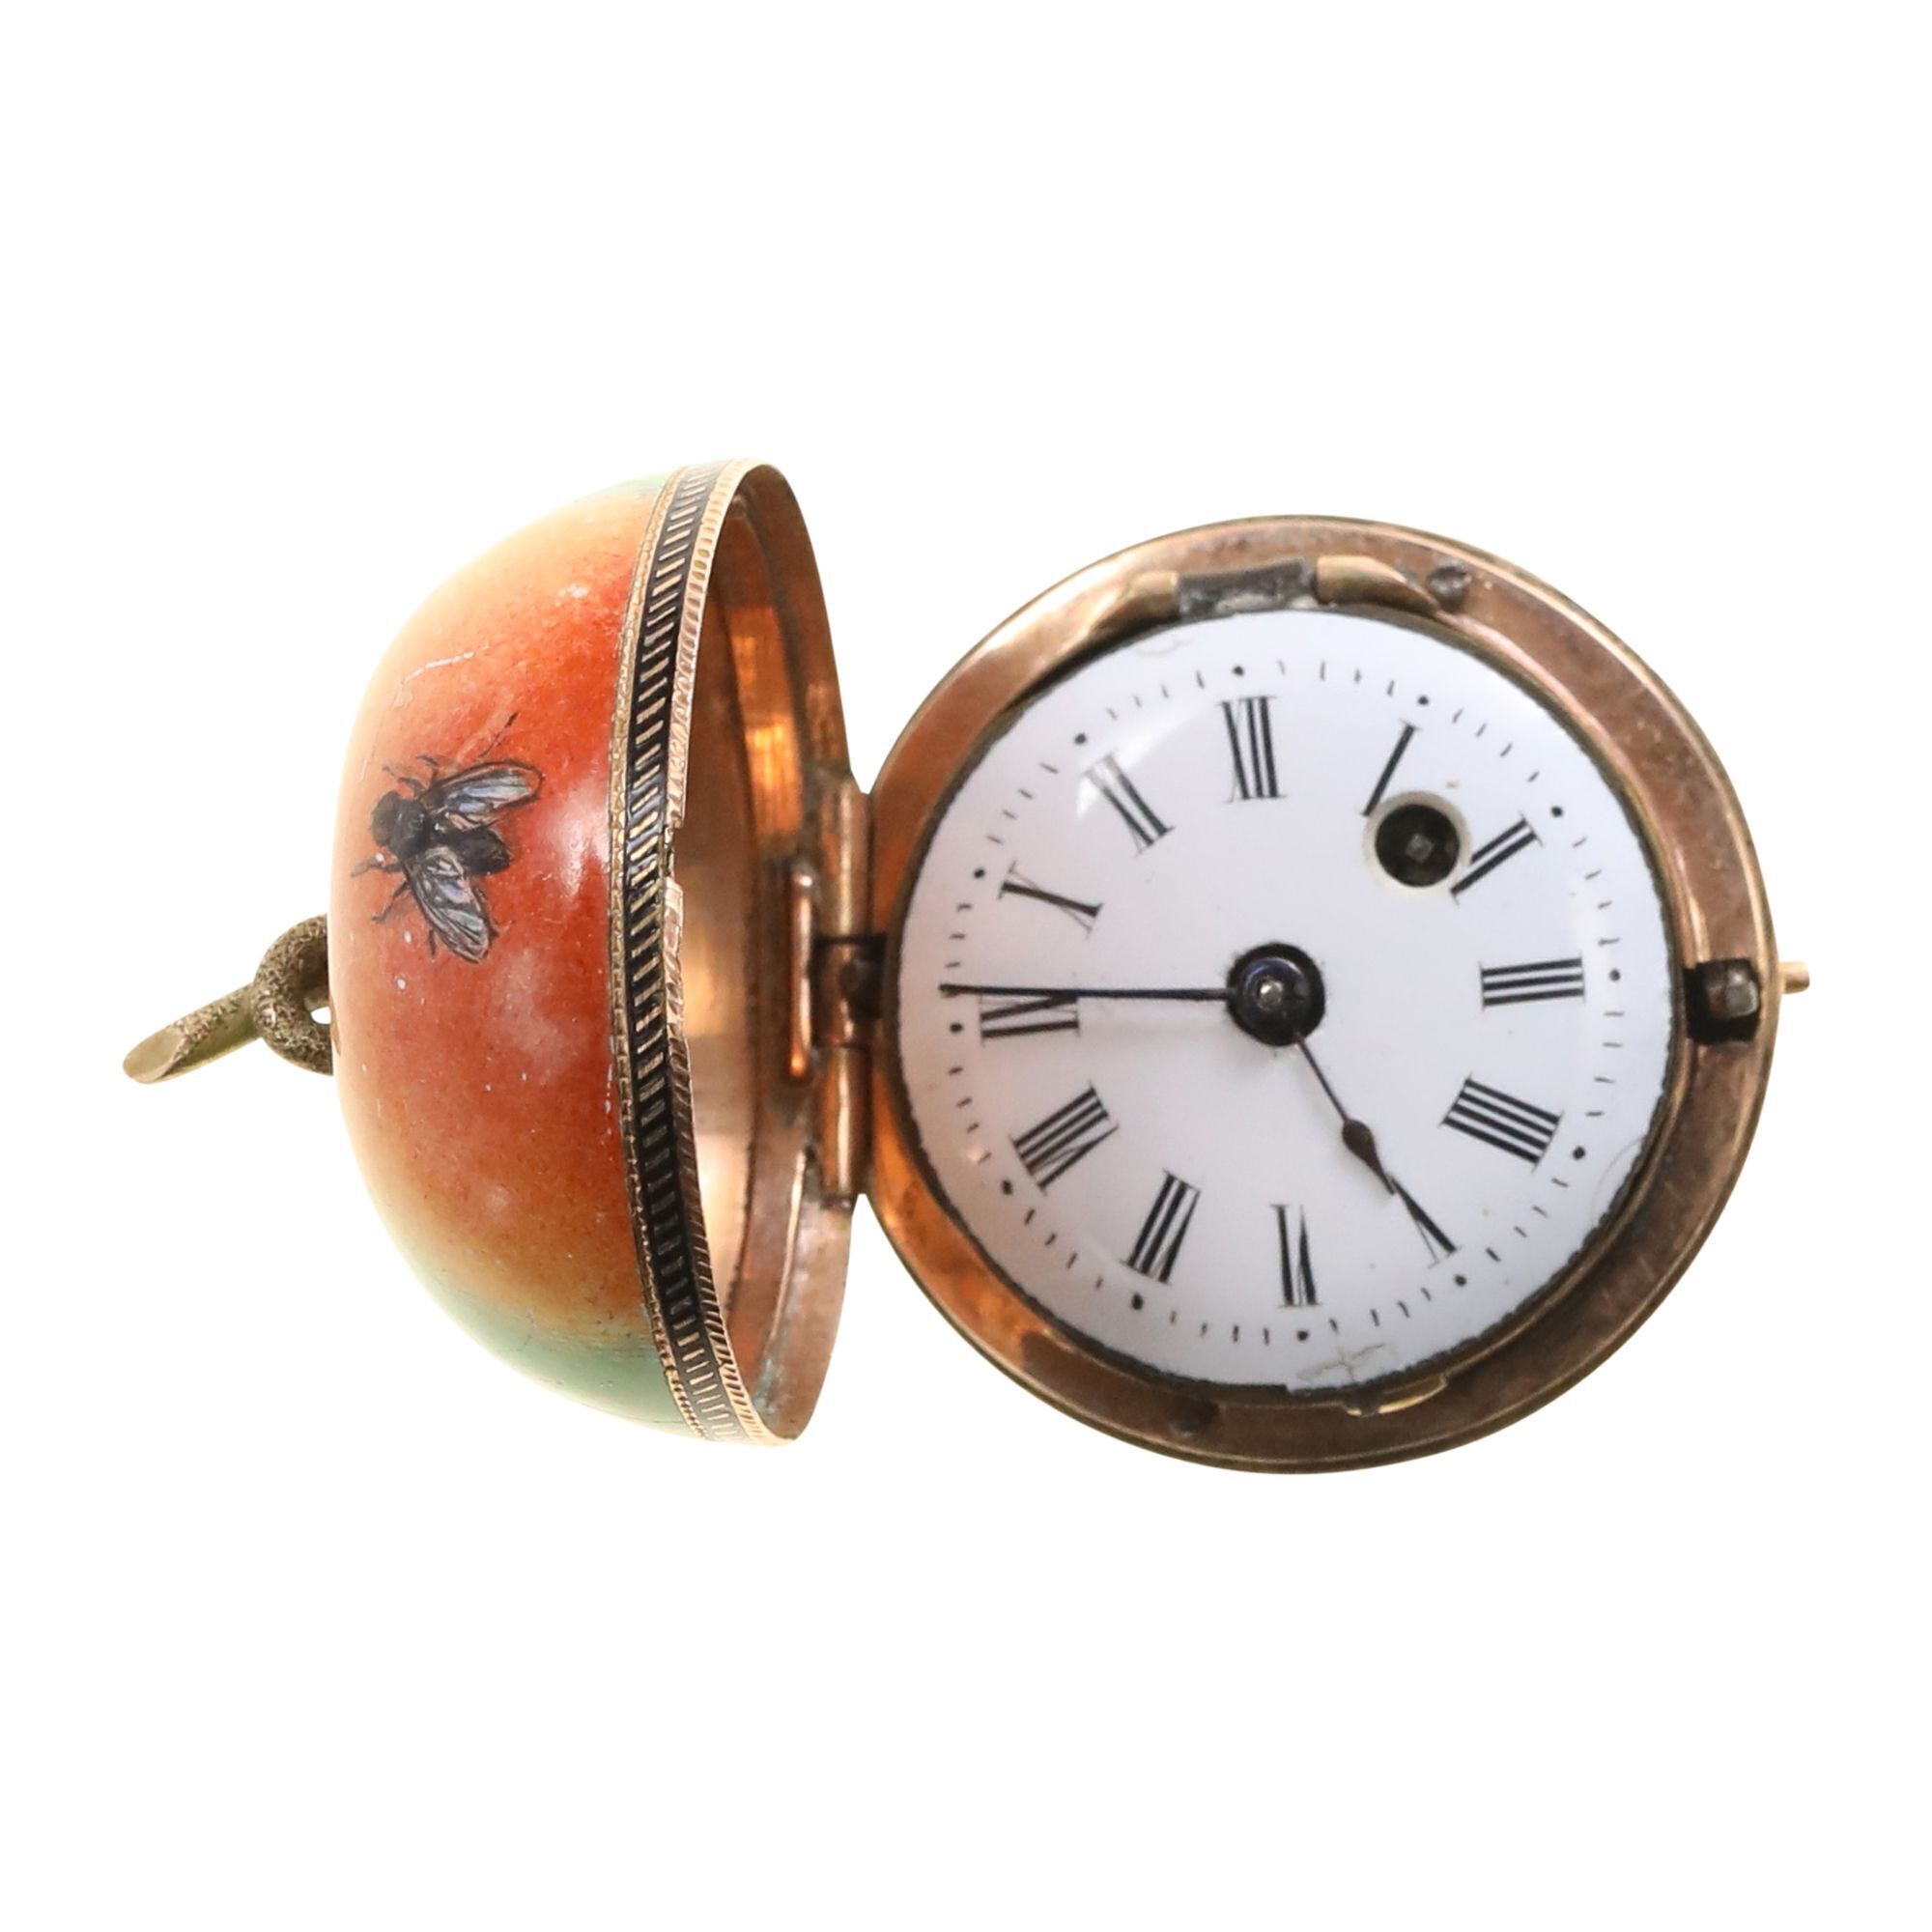 French 18K Gold Enamel Apple Form Fusee Watch - 2